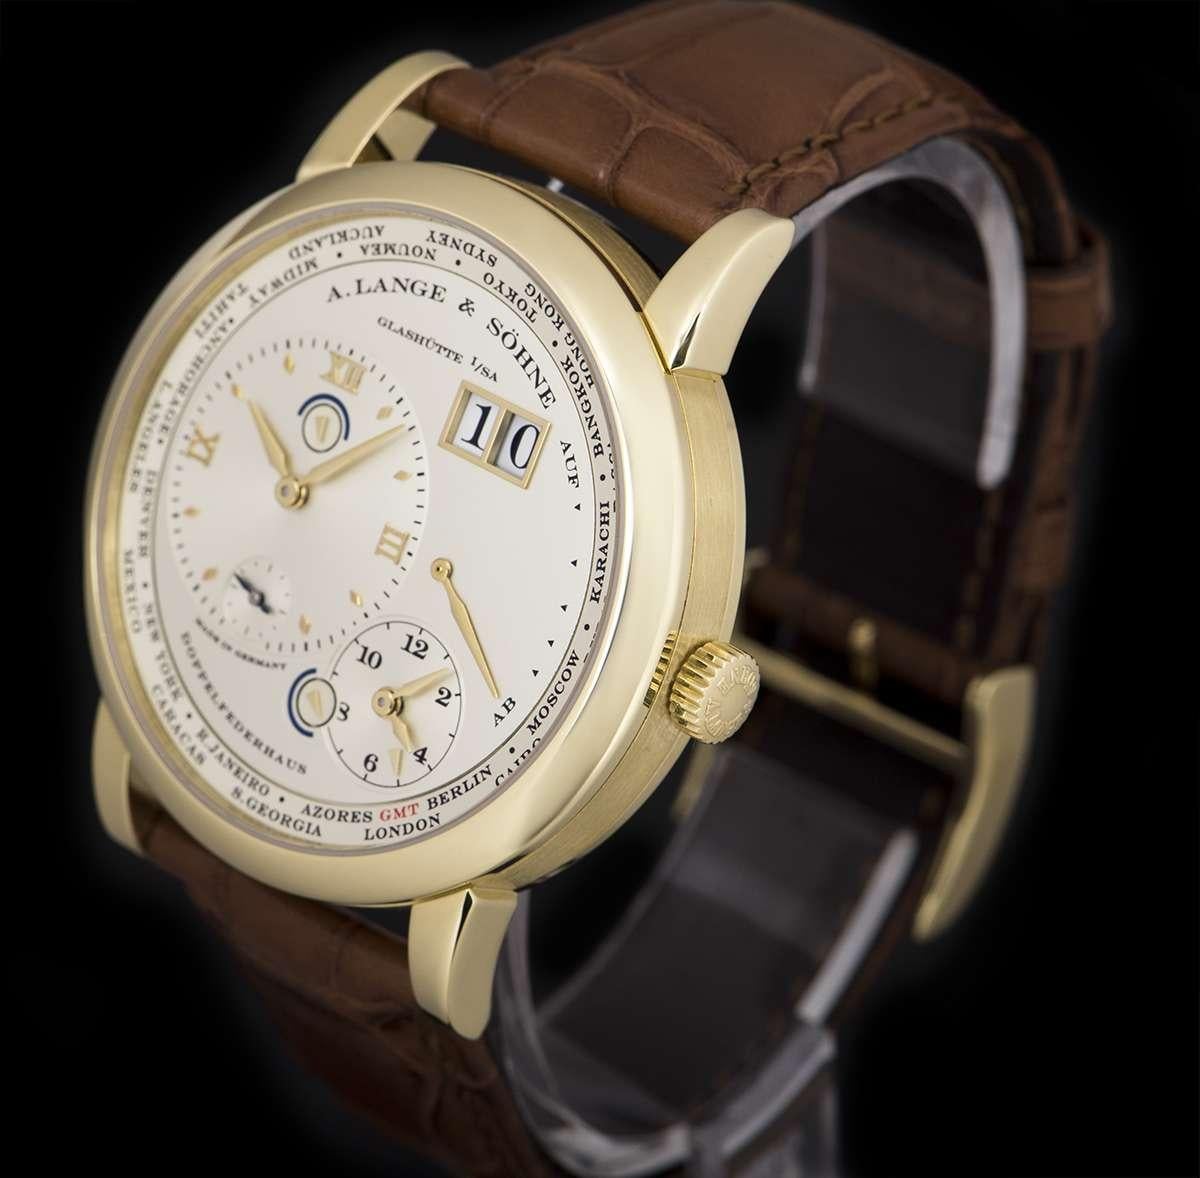 A 41.9 mm 18k Yellow Gold Lange 1 Time Zone Gents Wristwatch, silver home time dial with applied hour markers, a small seconds display and a day/night indicator, date at 2 0'clock, power reserve indicator at 3 0'clock, second time zone dial at 5